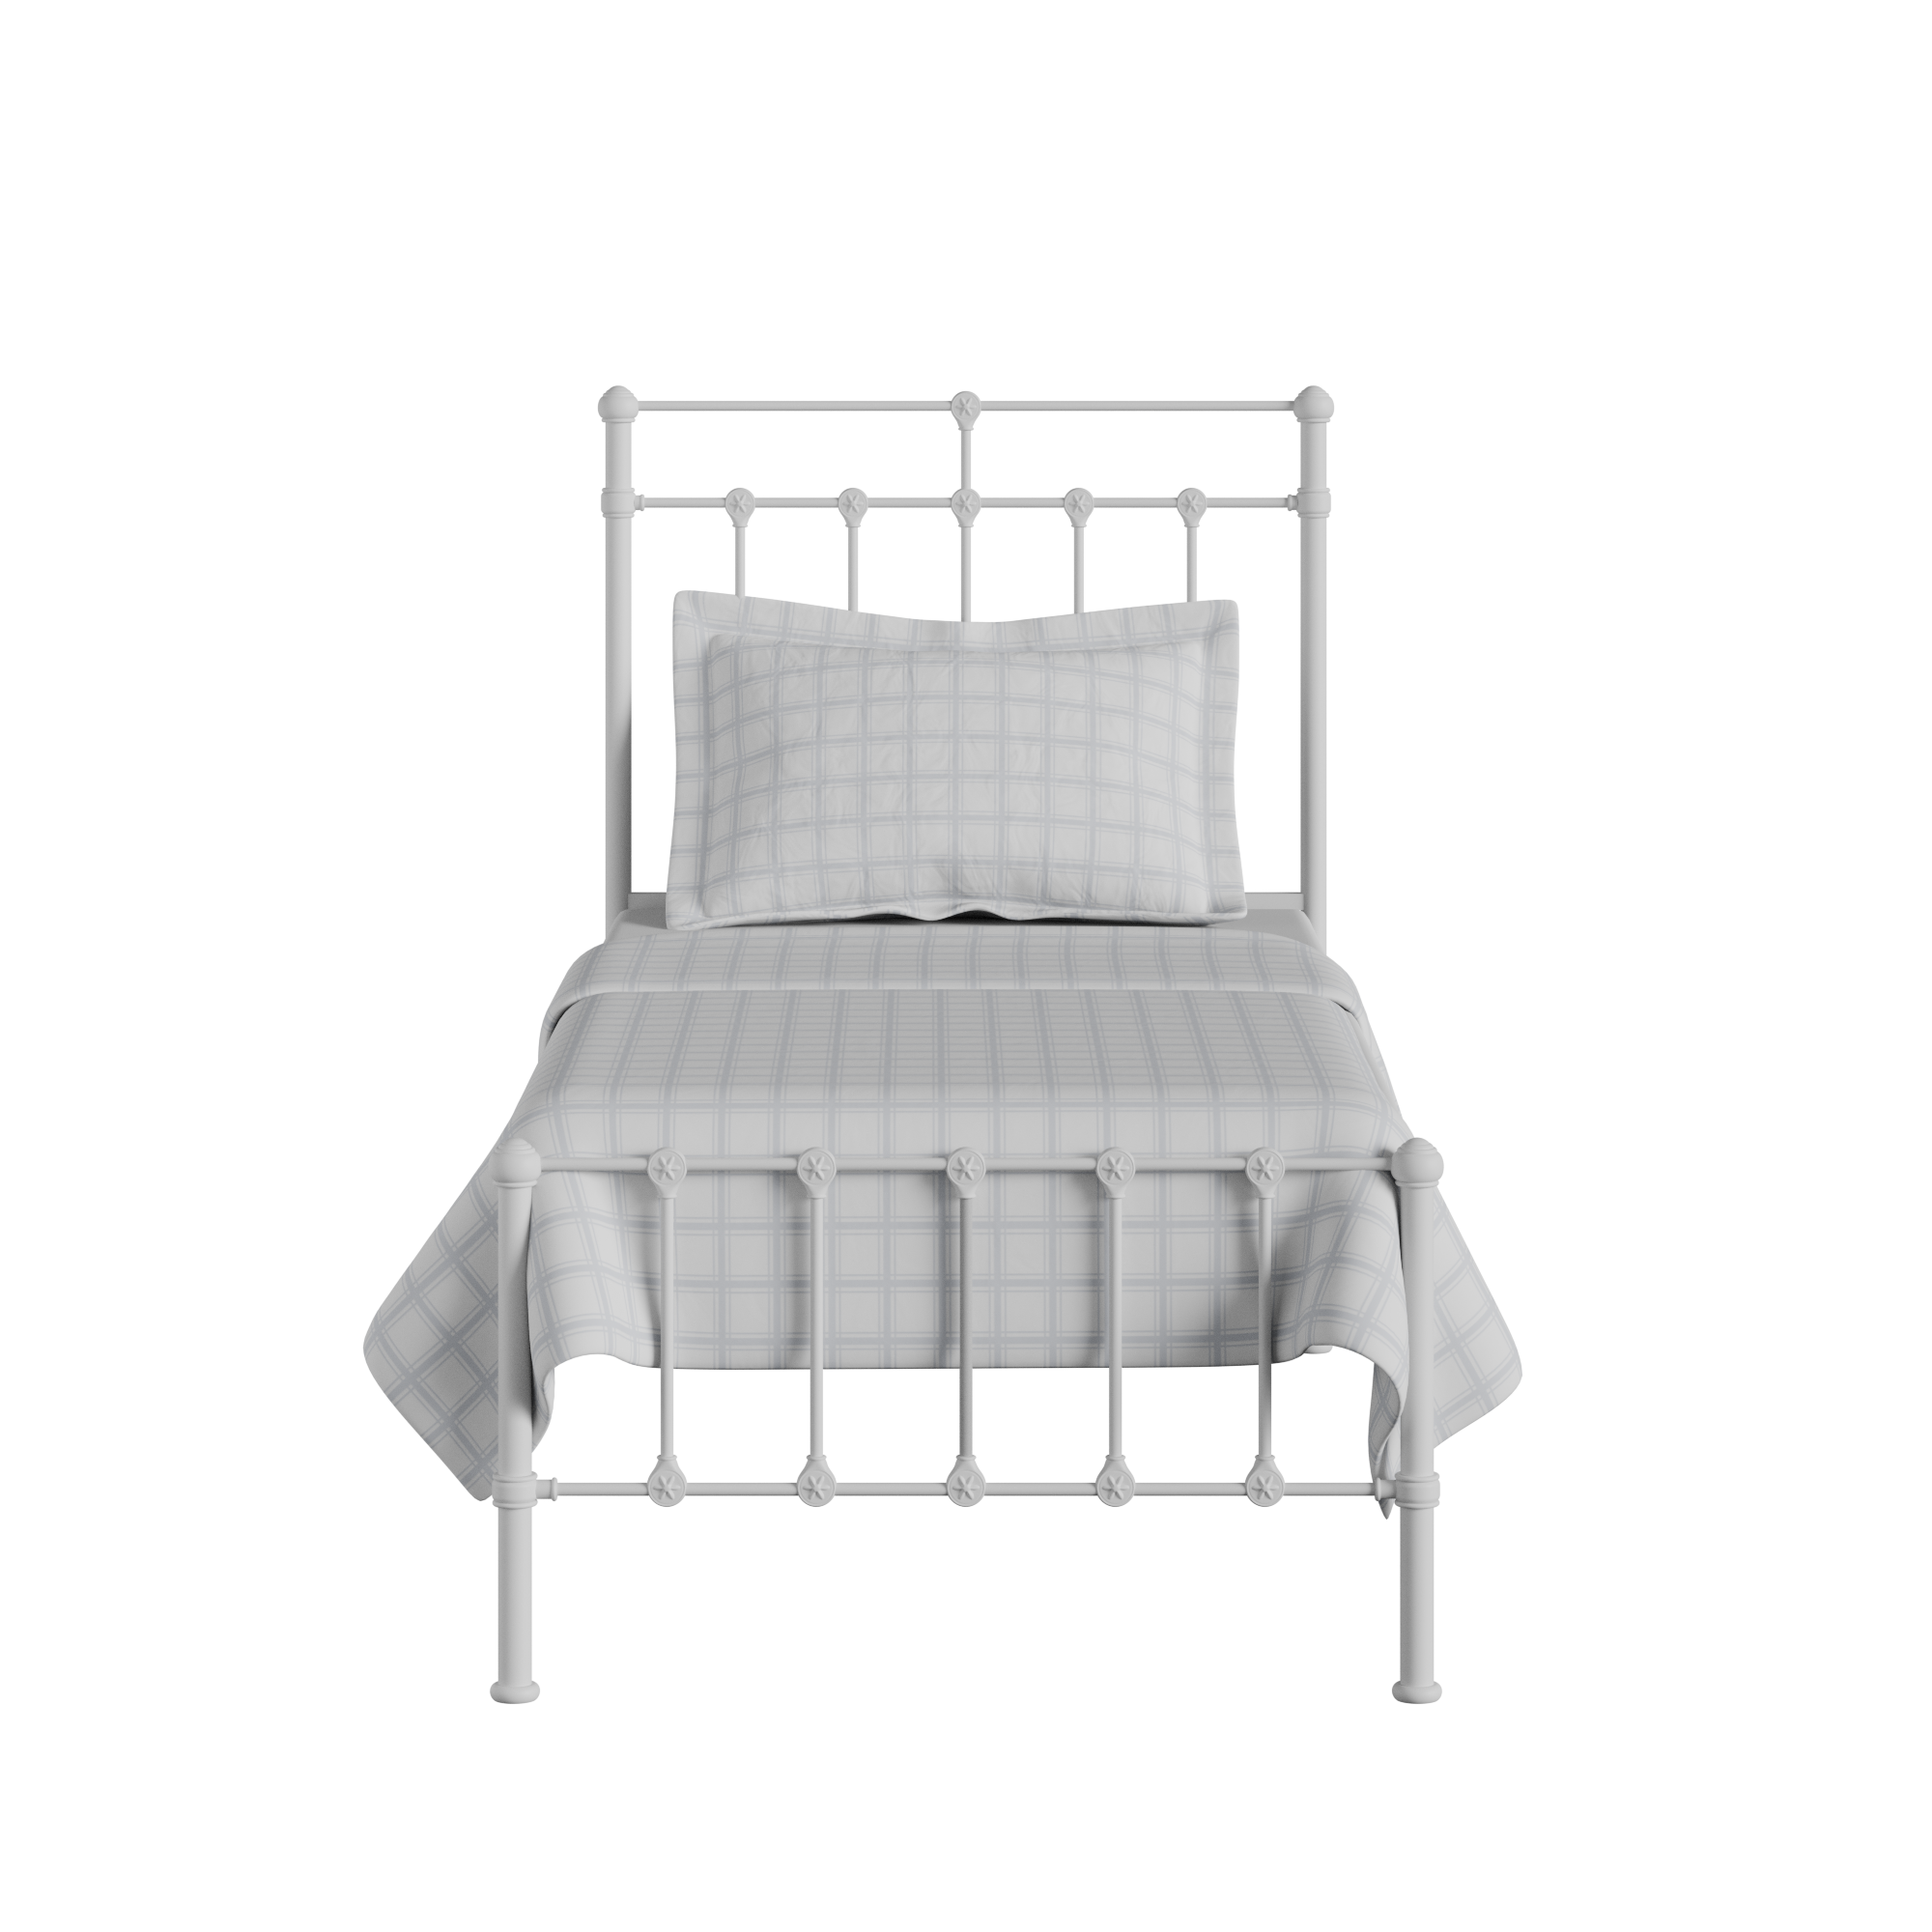 Ashley iron/metal single bed in white